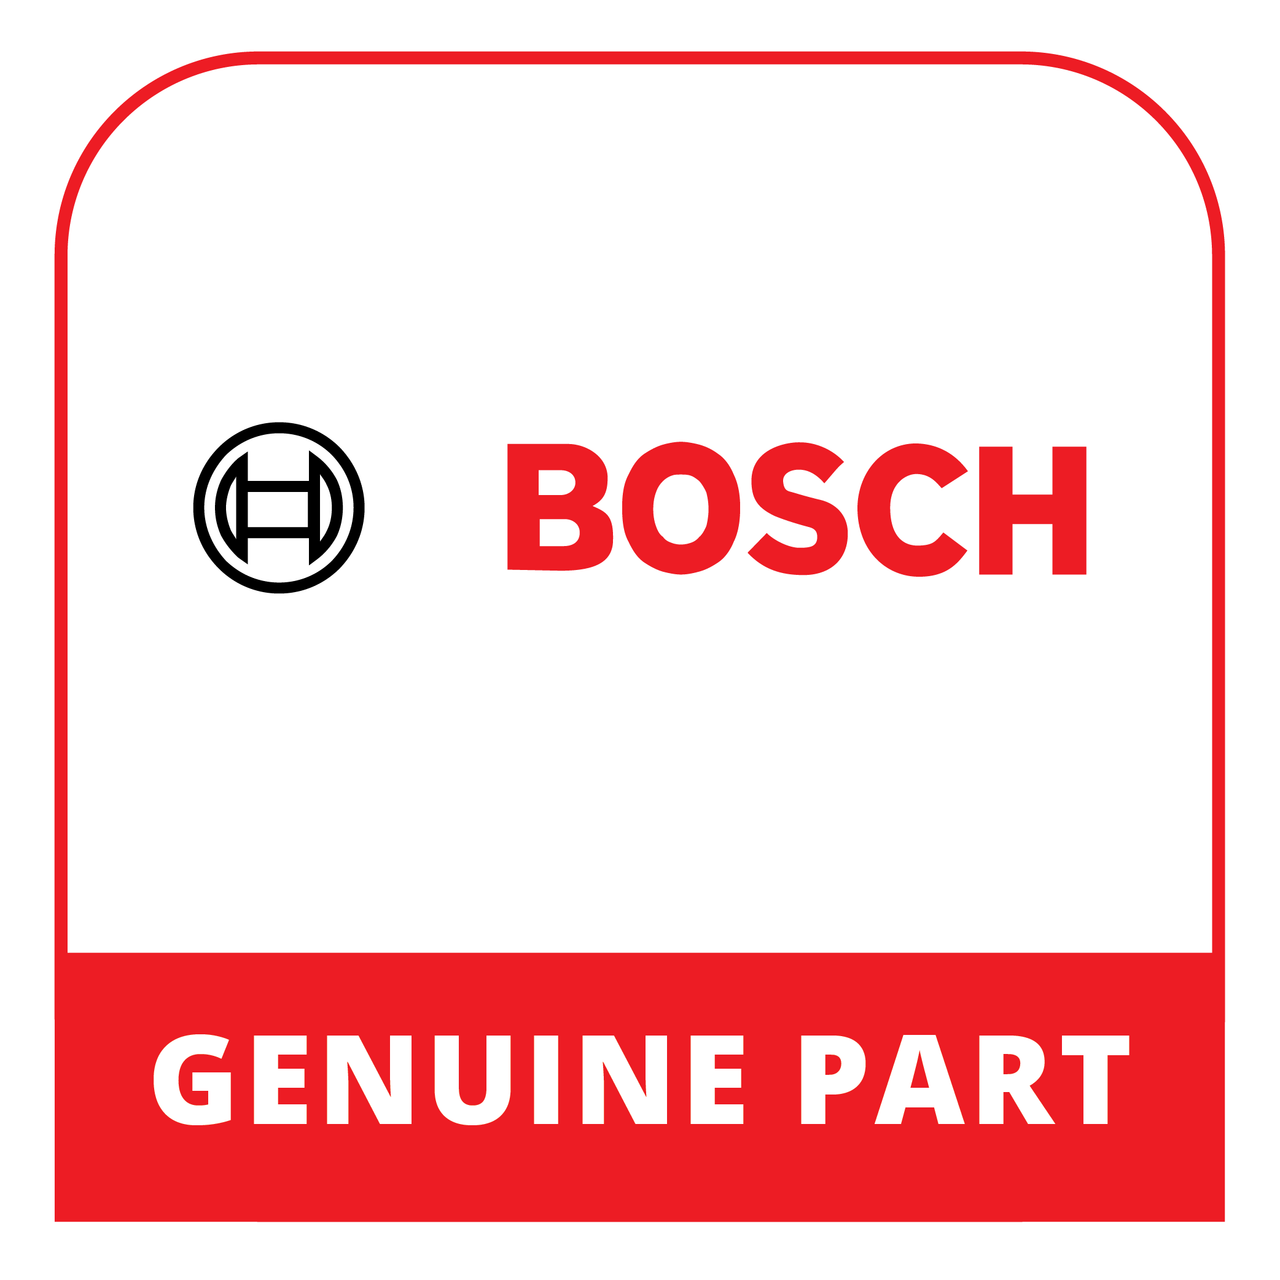 Bosch (Thermador) 12028510 - Cable Harness - Genuine Bosch (Thermador) Part